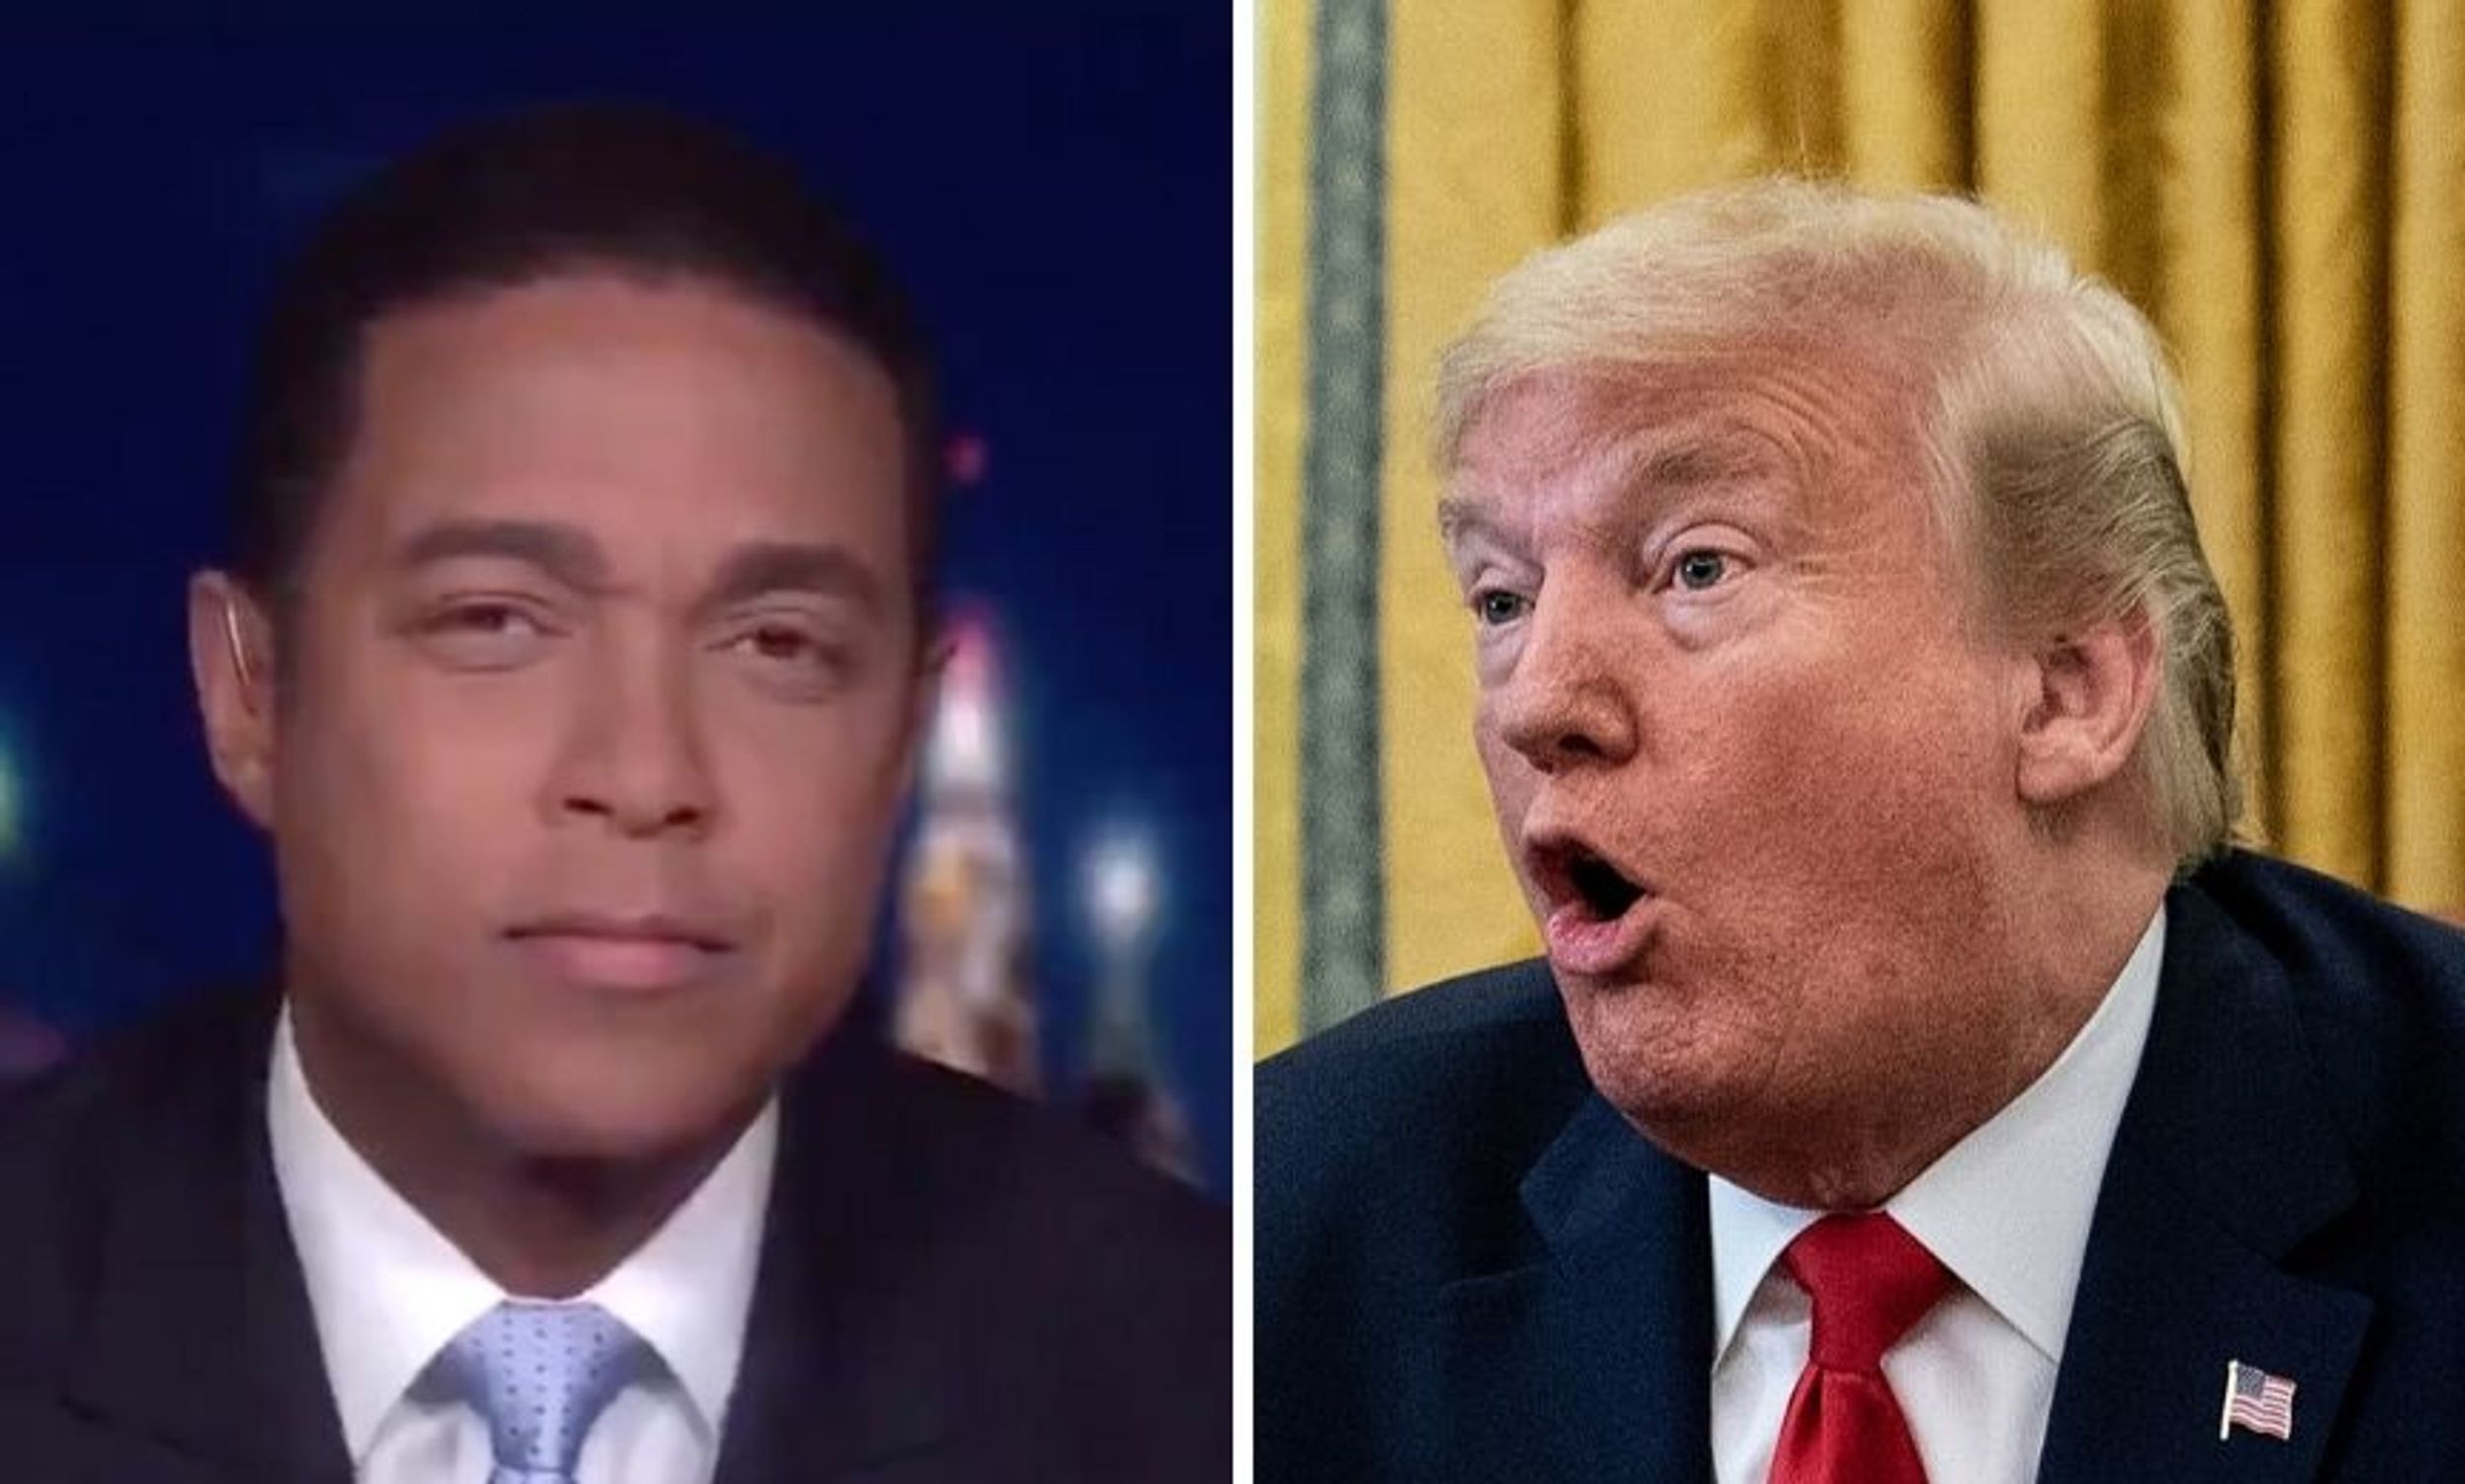 Don Lemon Perfectly Skewers Trump After He Retweeted a Bonkers Conspiracy Theory About Barack Obama